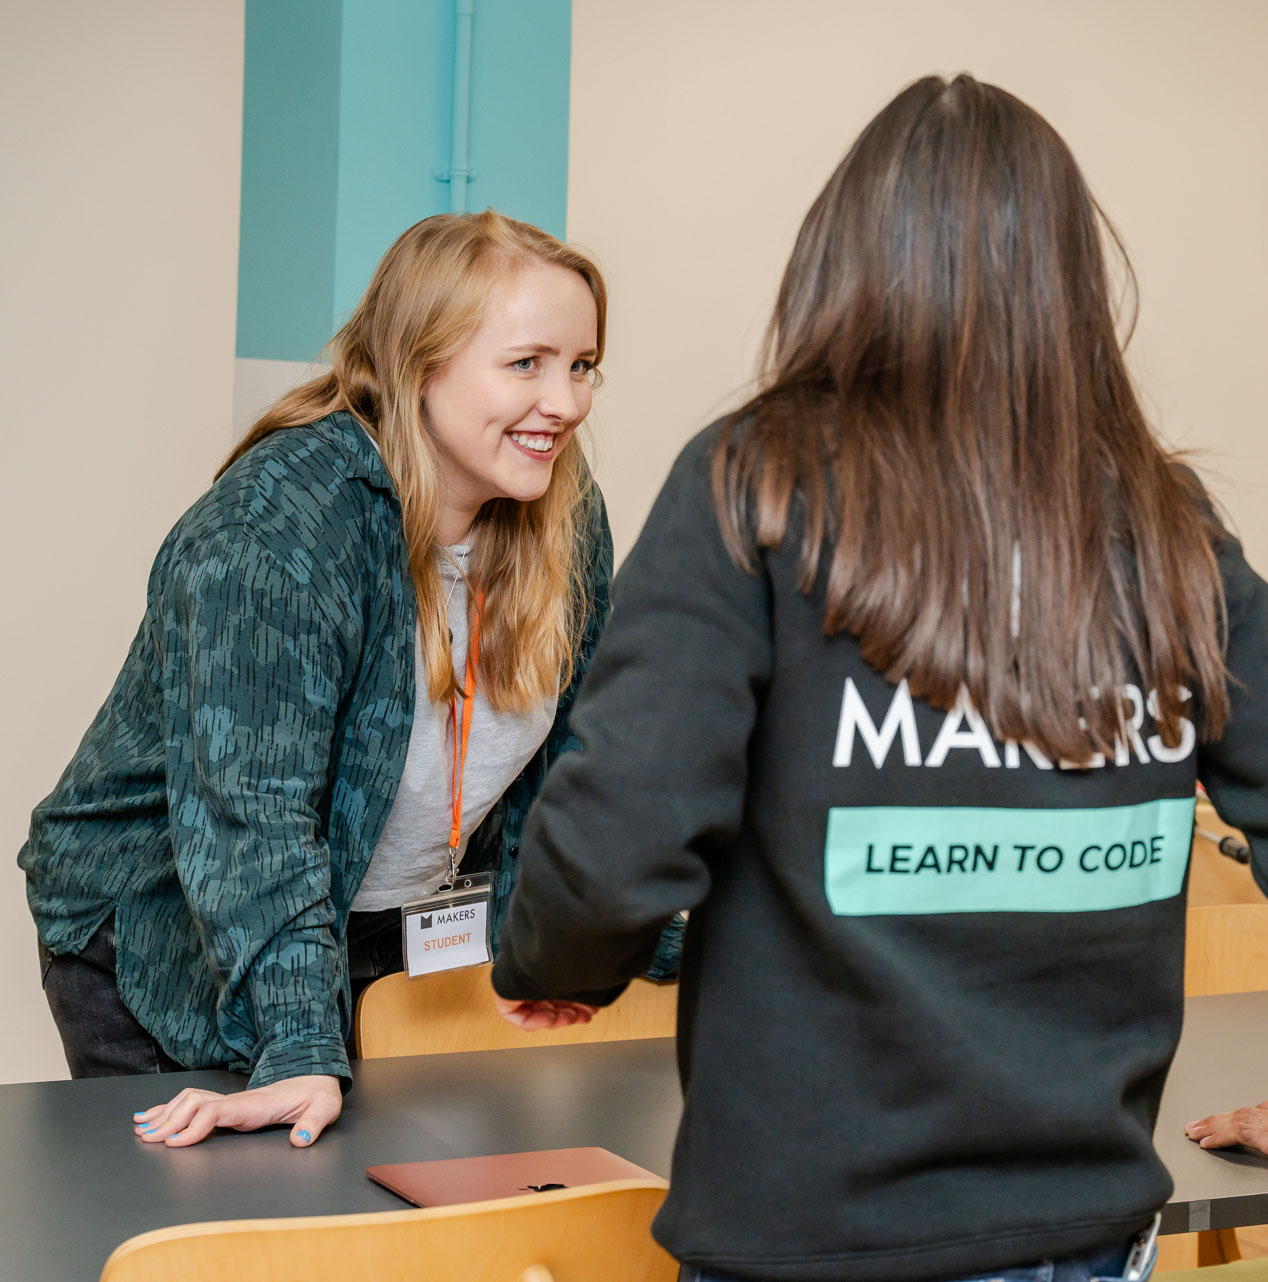 Female Makers tutor with long brown hair over a branded black jumper, talks to a blonde student with a green patterned sweater